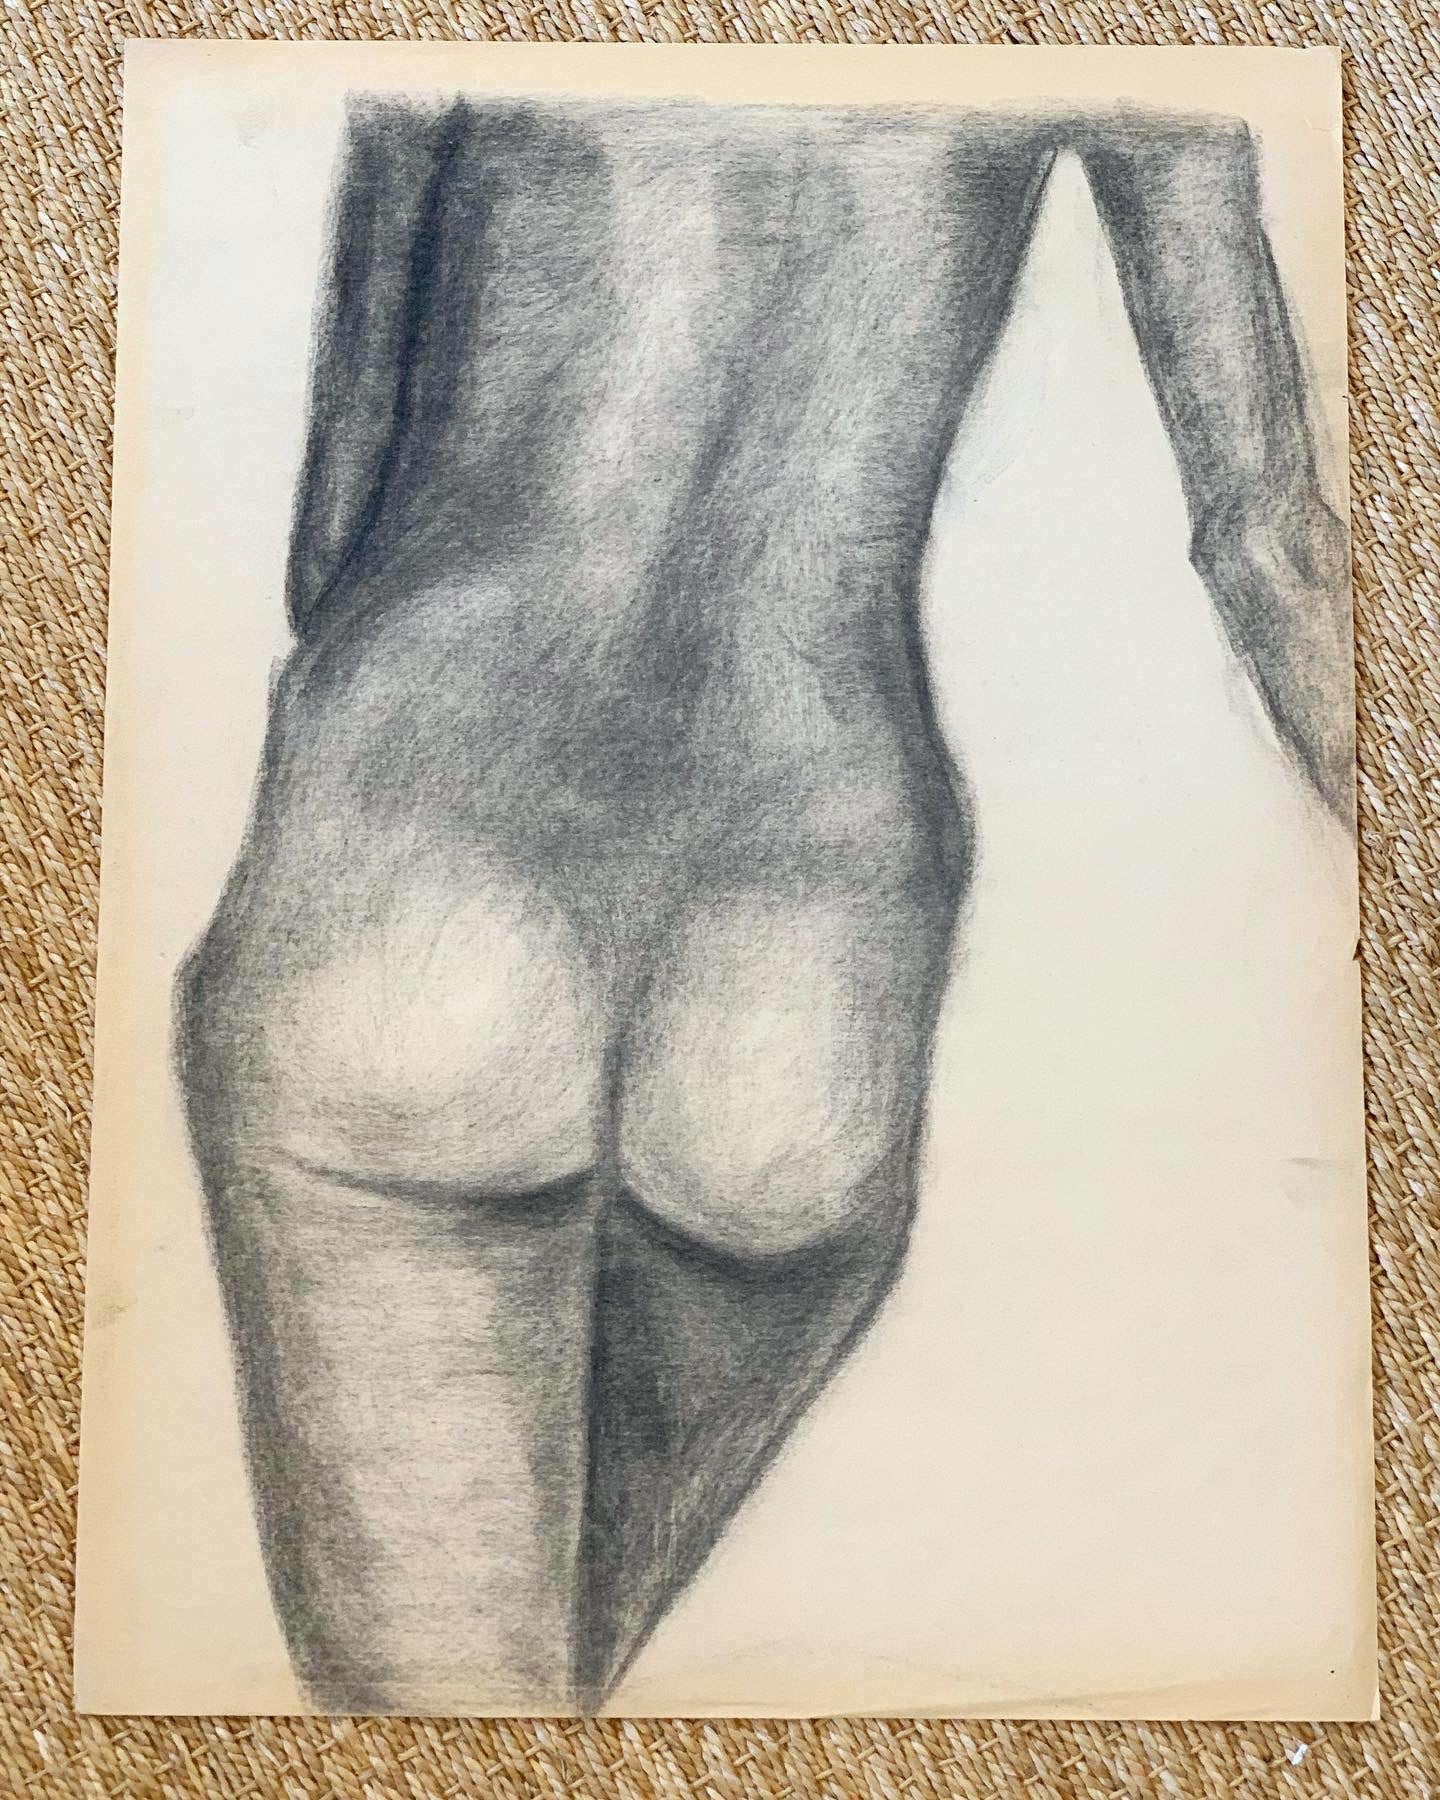 "Back of Female Nude Study #2" by Curtis